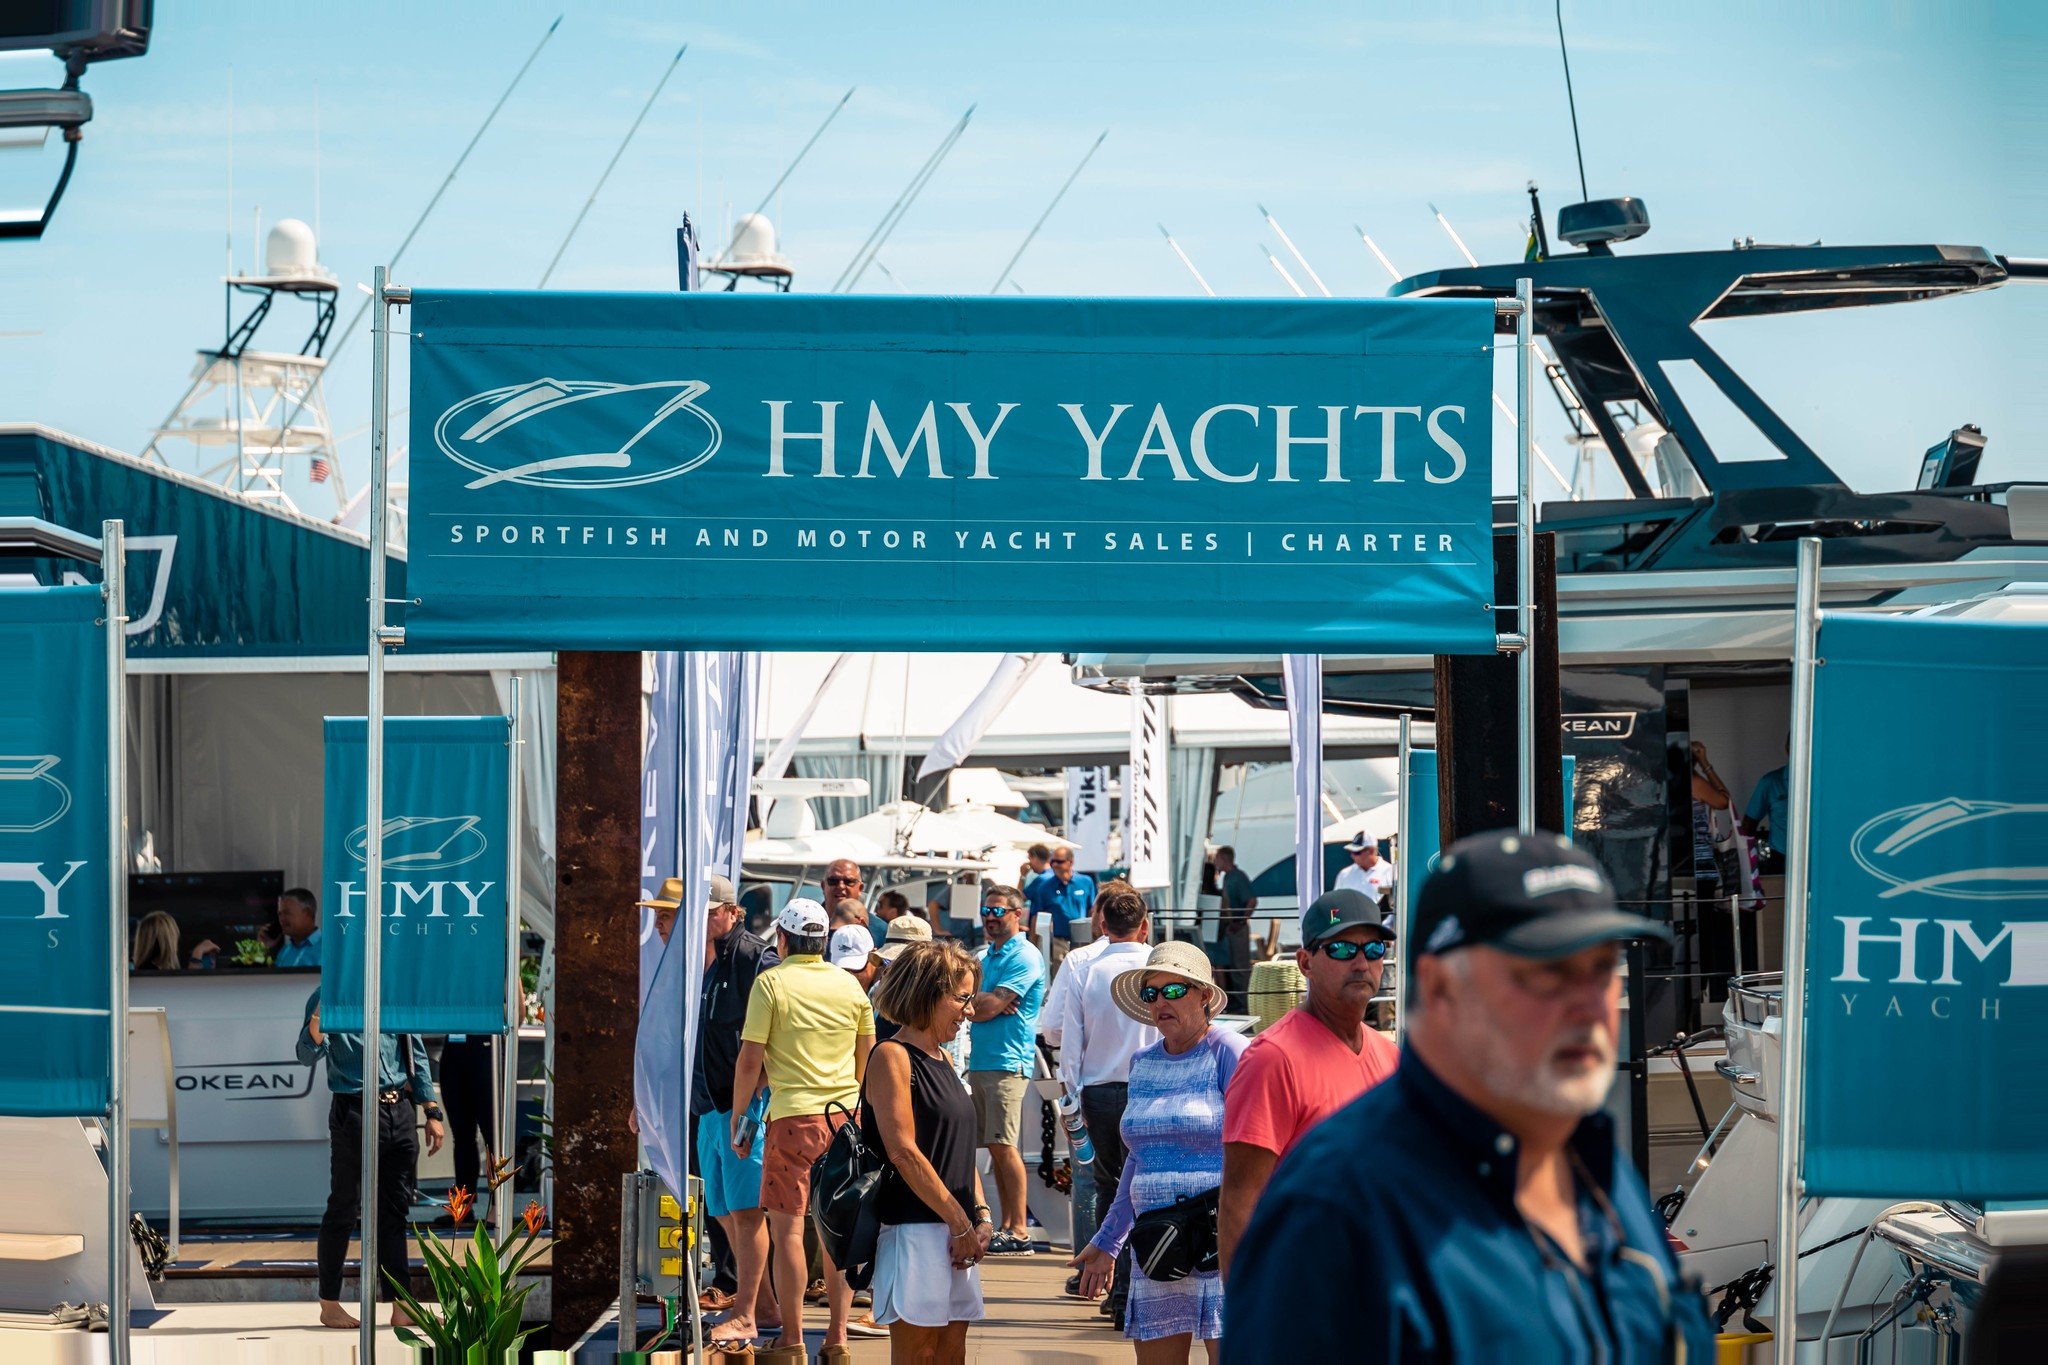 HMY Yachts at Boat Show